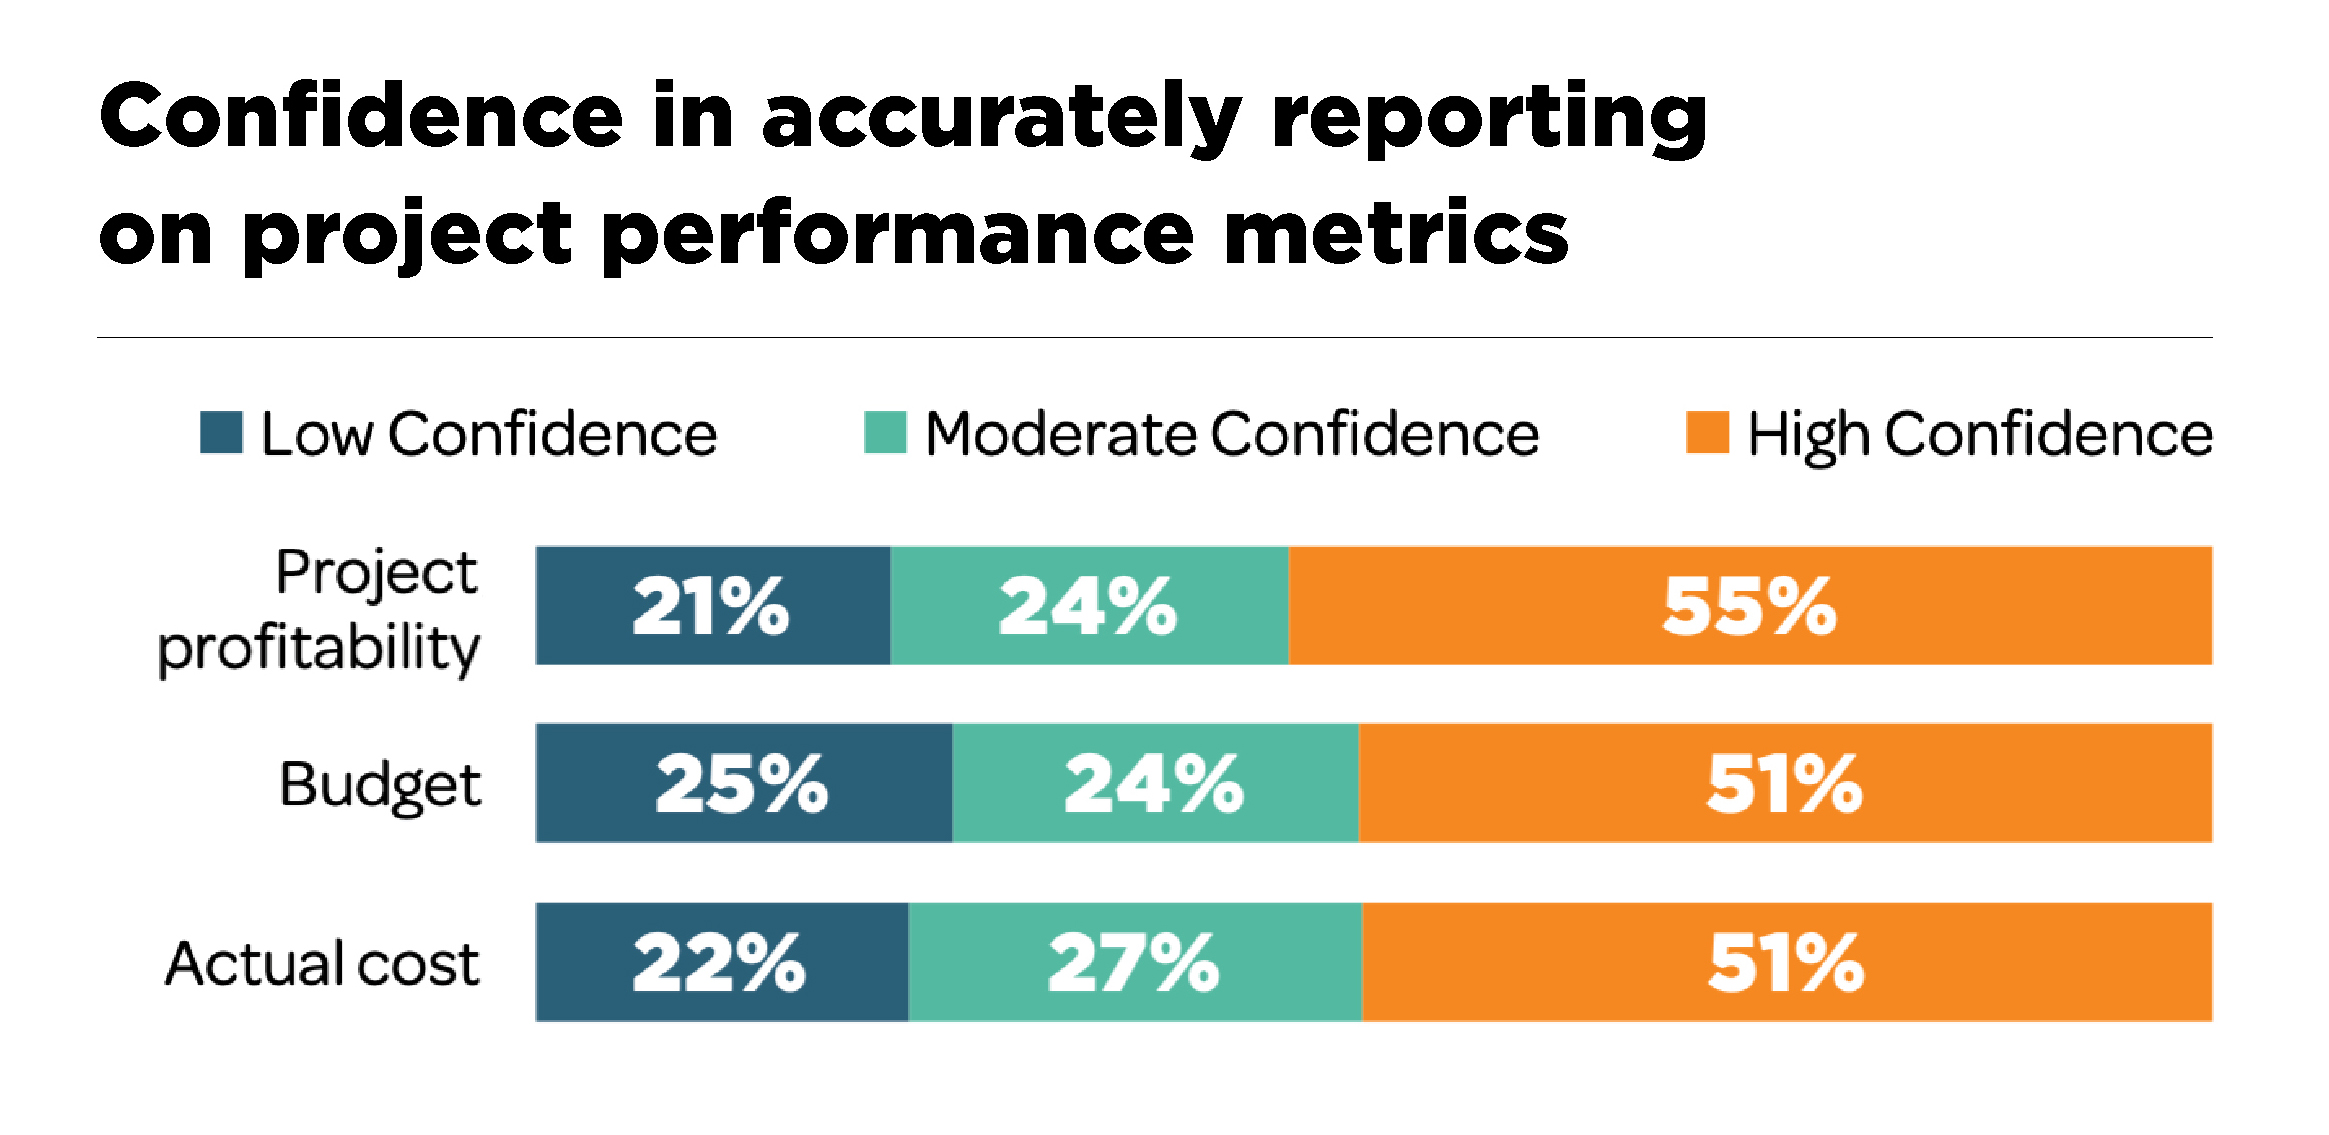 Confidence in accurately reporting on project performance metrics